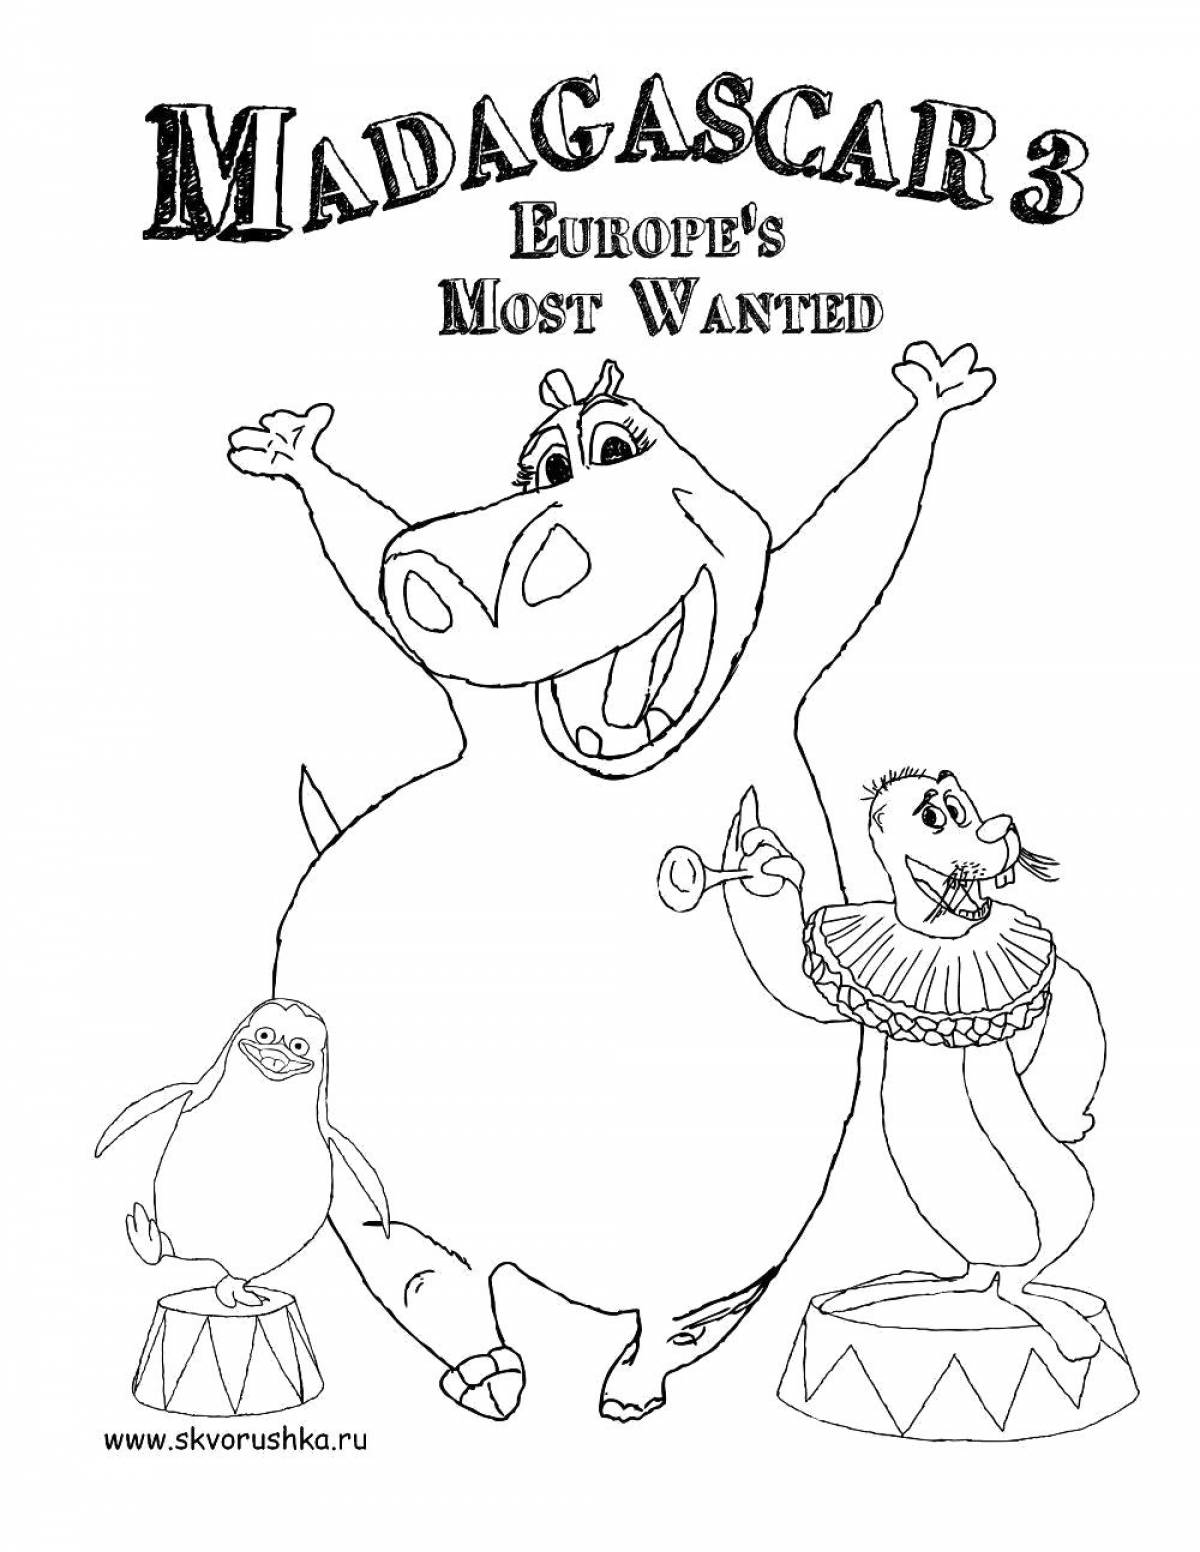 Unique theater poster coloring page